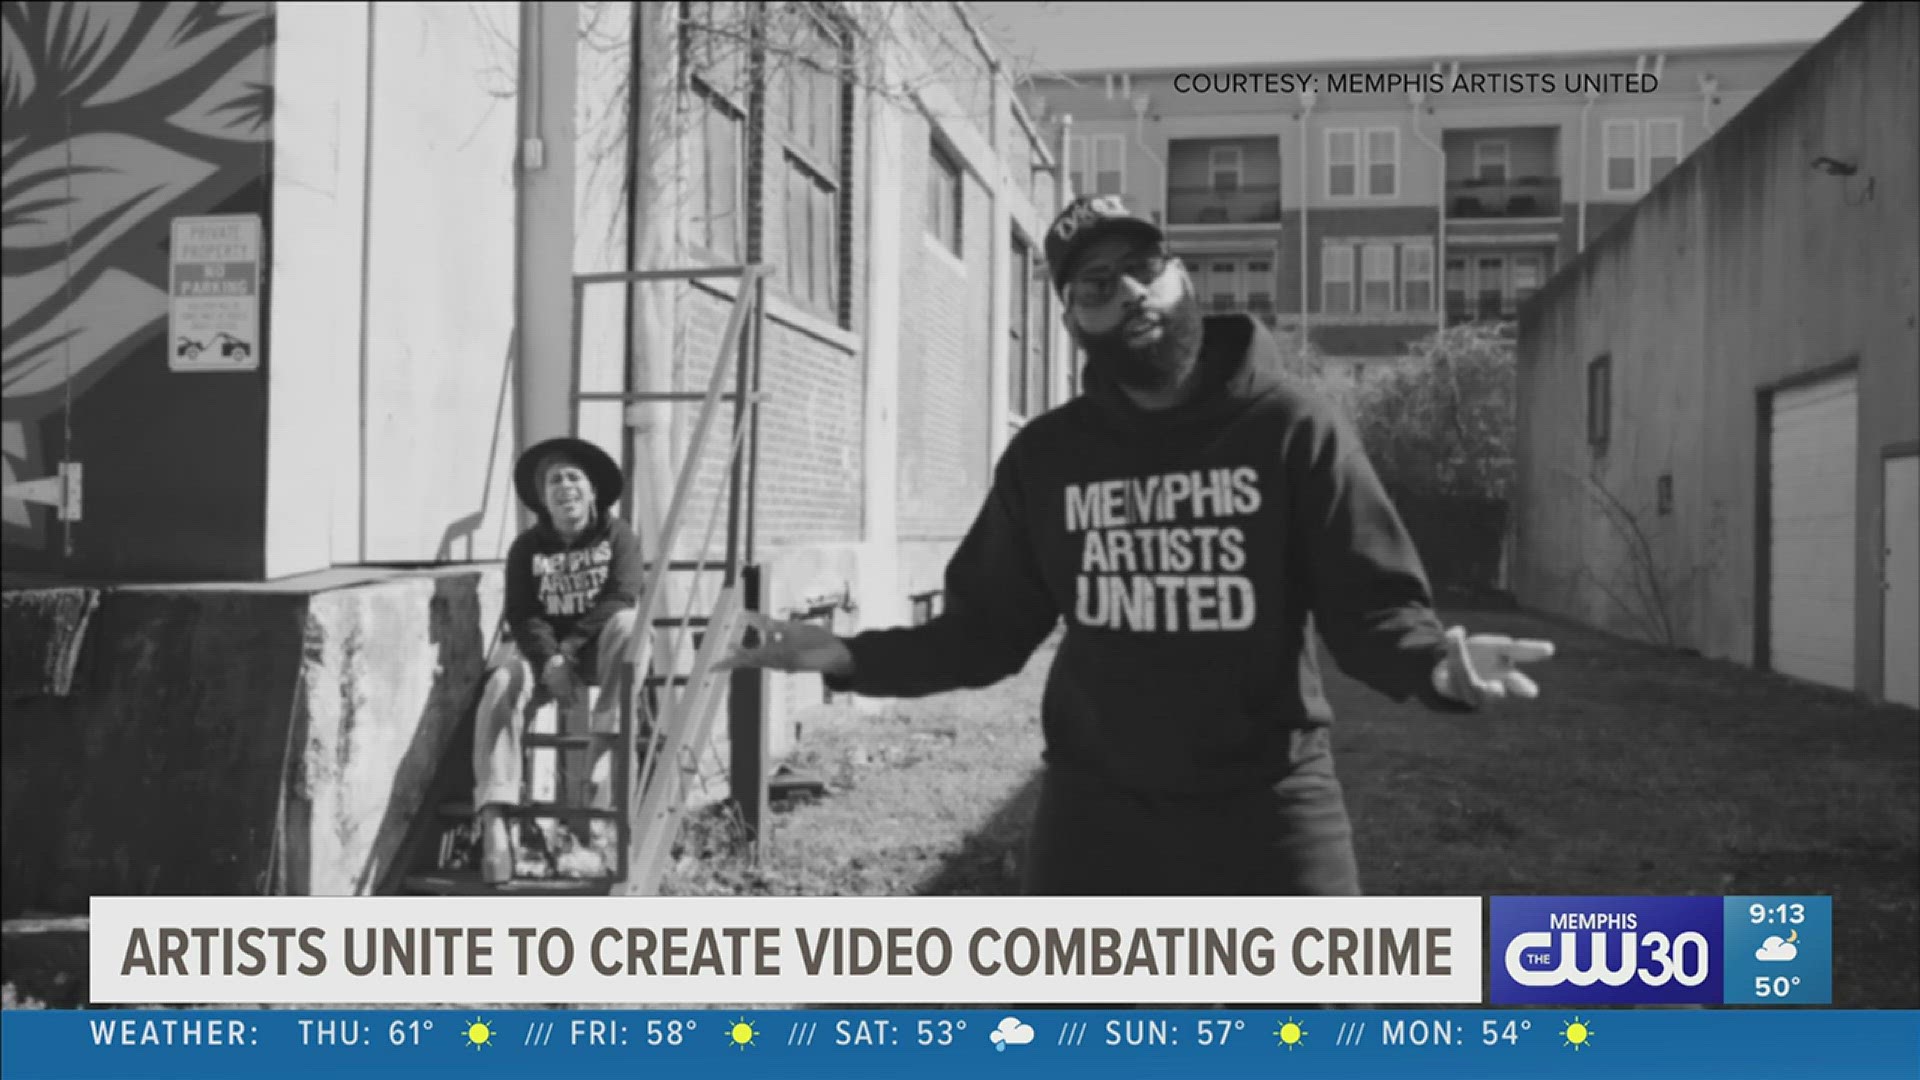 Homicide numbers in the Mid-South are the highest they have ever been. However, Memphis Artists United is hoping to turn that around.